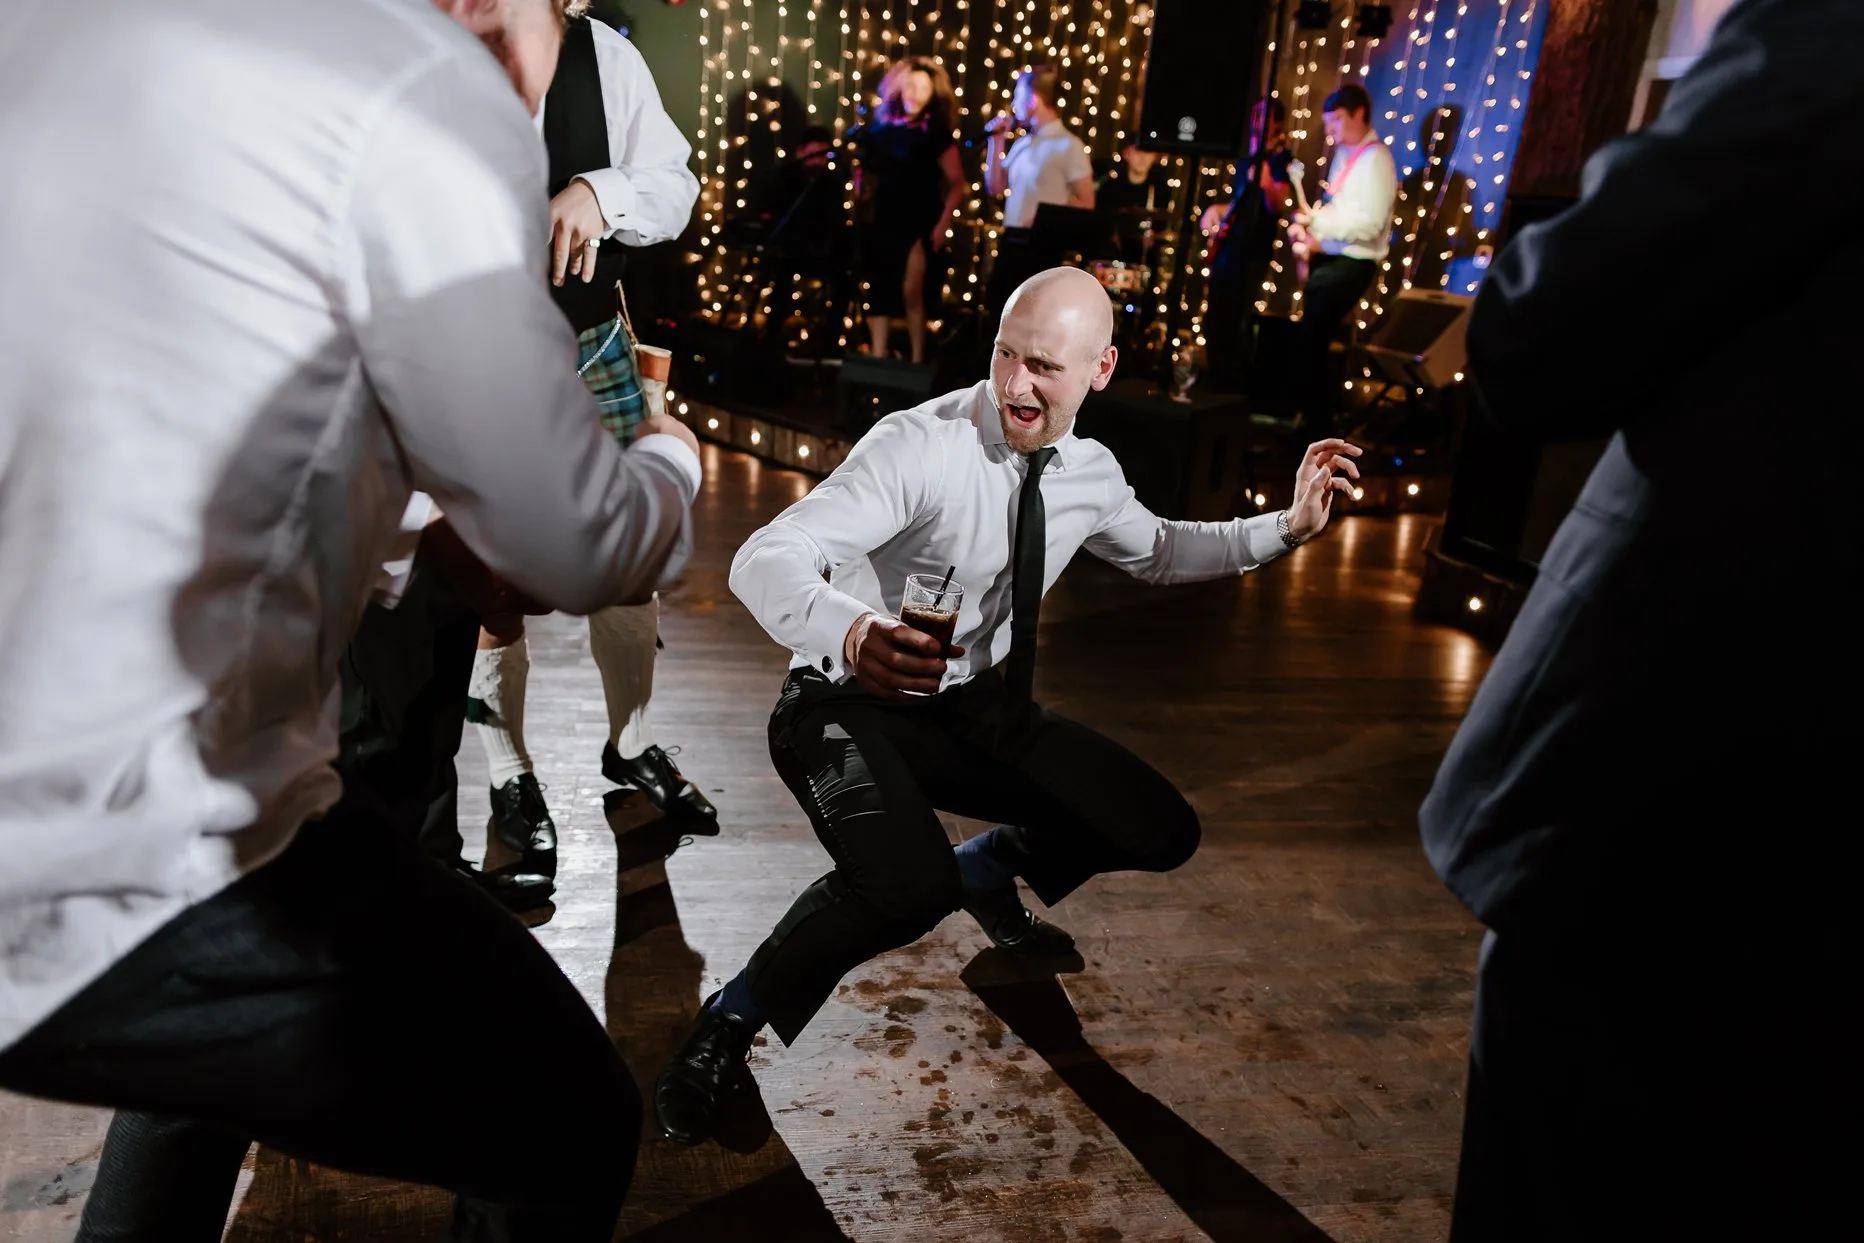 Wedding guest dancing on dancefloor at Oaklands. He is crouched down making a silly face.